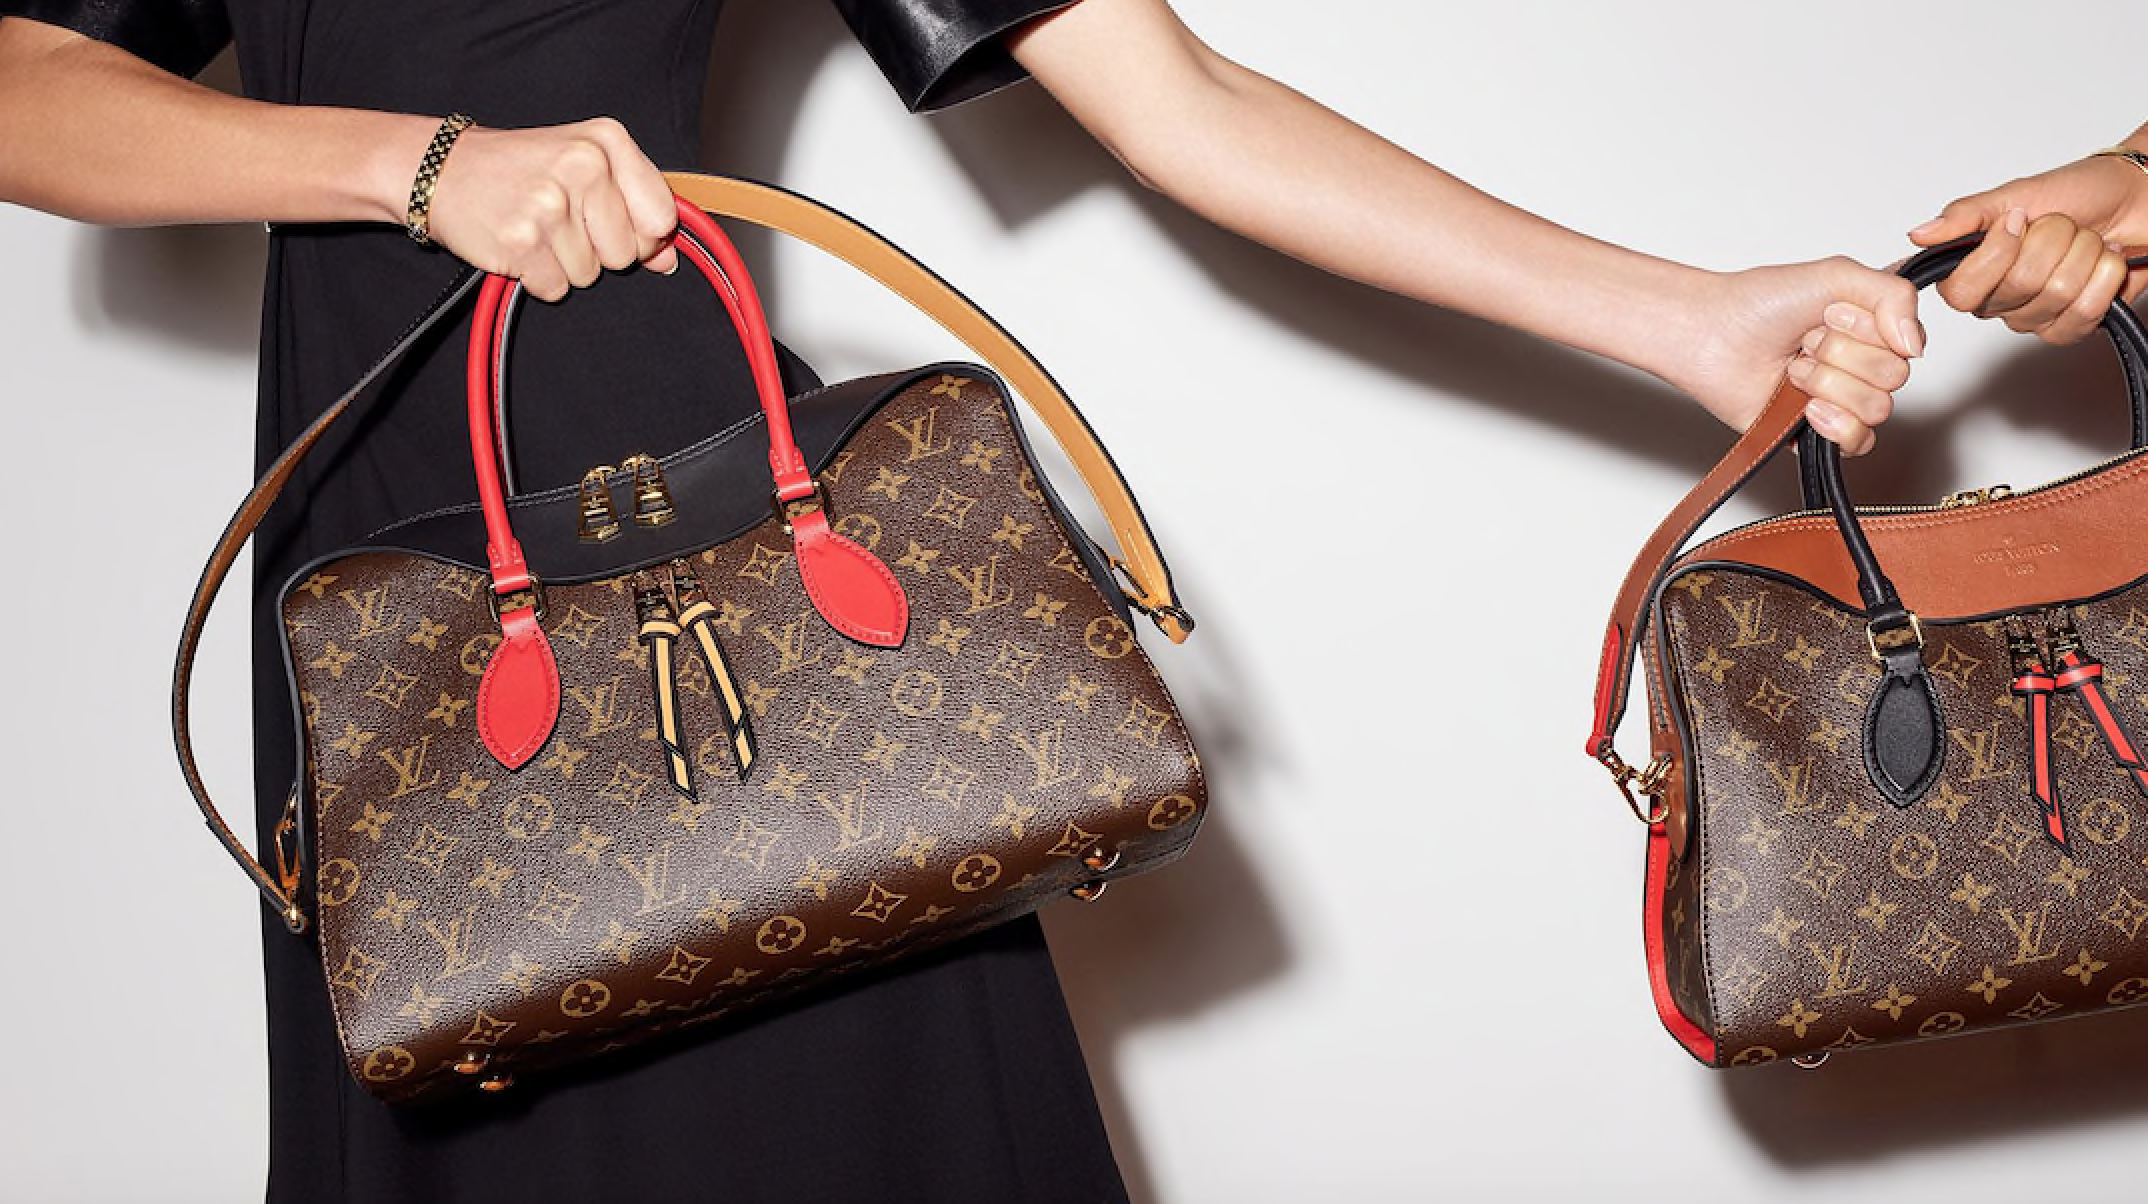 Amid a recession and a pandemic, Louis Vuitton has increased the prices  across all its handbag styles by 20% - Luxurylaunches